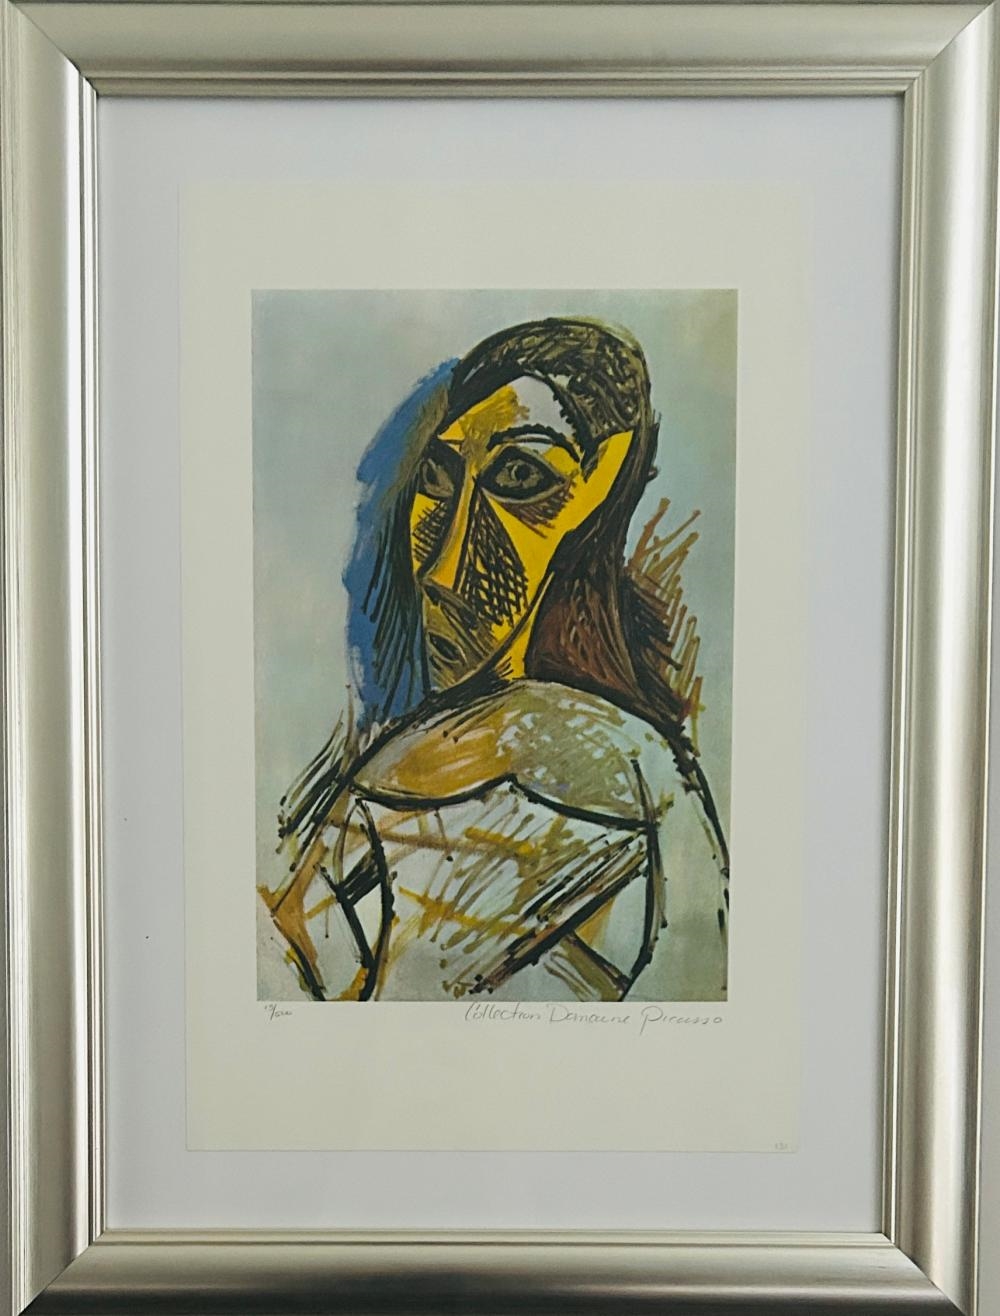 After Pablo Picasso - Female Nude (Study). Limited Edition Giclee 13/500. Image 50 cm x 33 cm Frame 70 cm x 52 cm Exclusively Commissioned for the Picasso Collection. Comes With a Certificate of Authenticity by Pablo Picasso